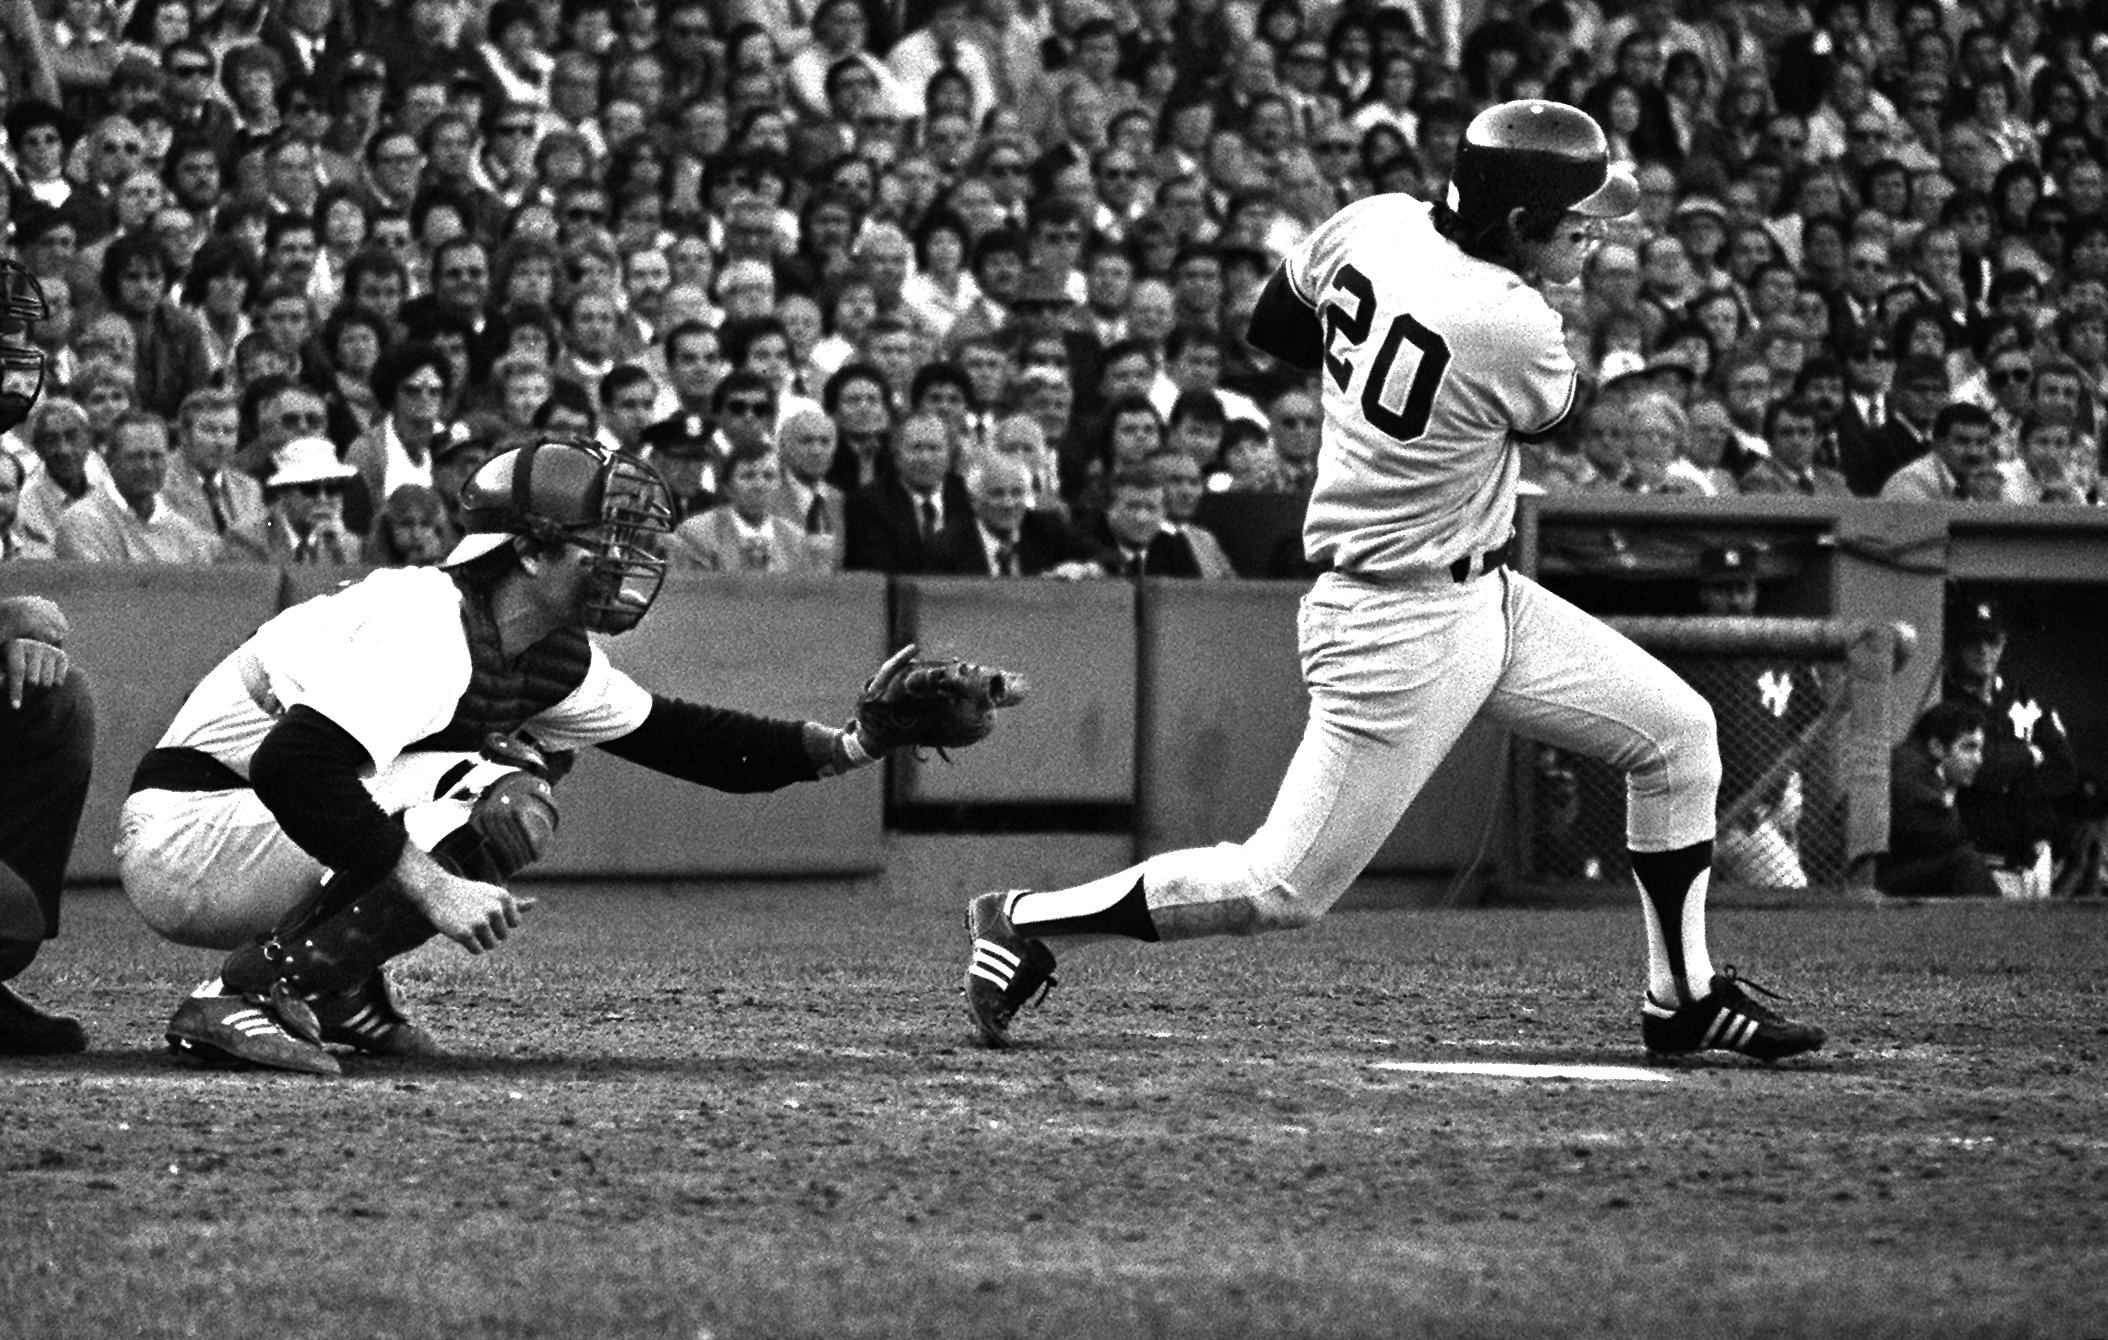 Bucky Dent: BFD